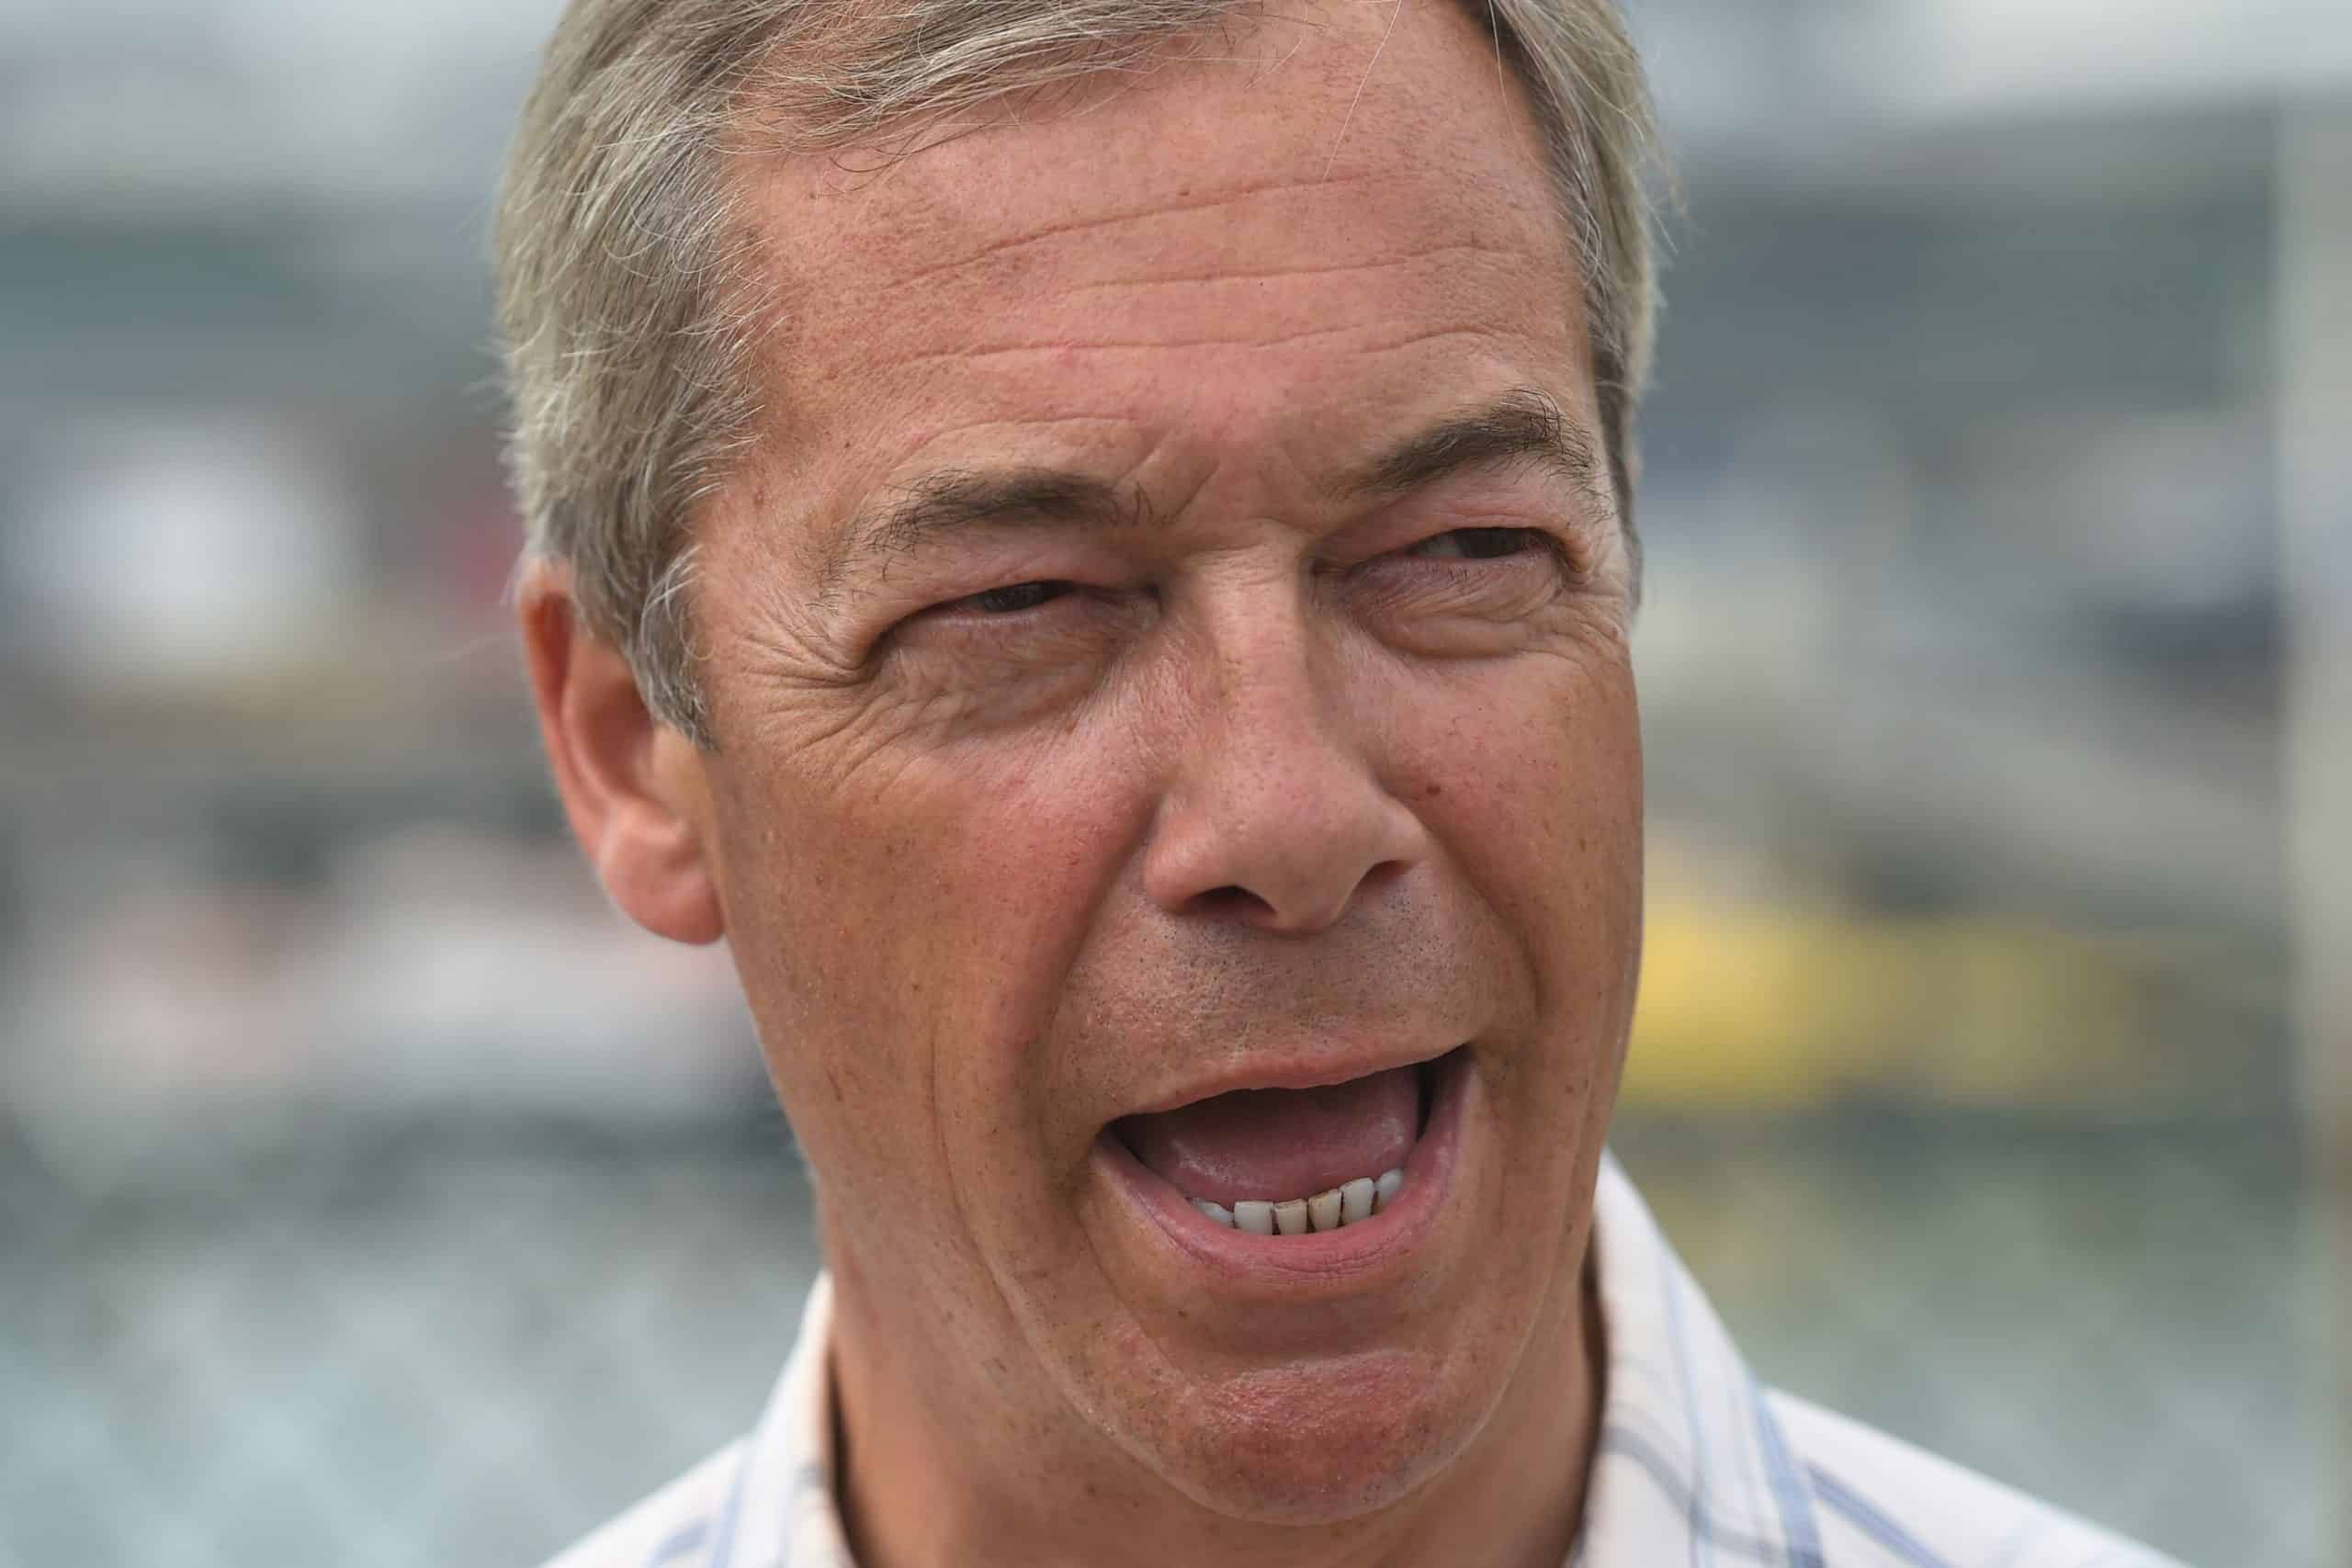 Reactions as Nigel Farage wants to scrap ‘EU Human Rights Act’ – which doesn’t exist